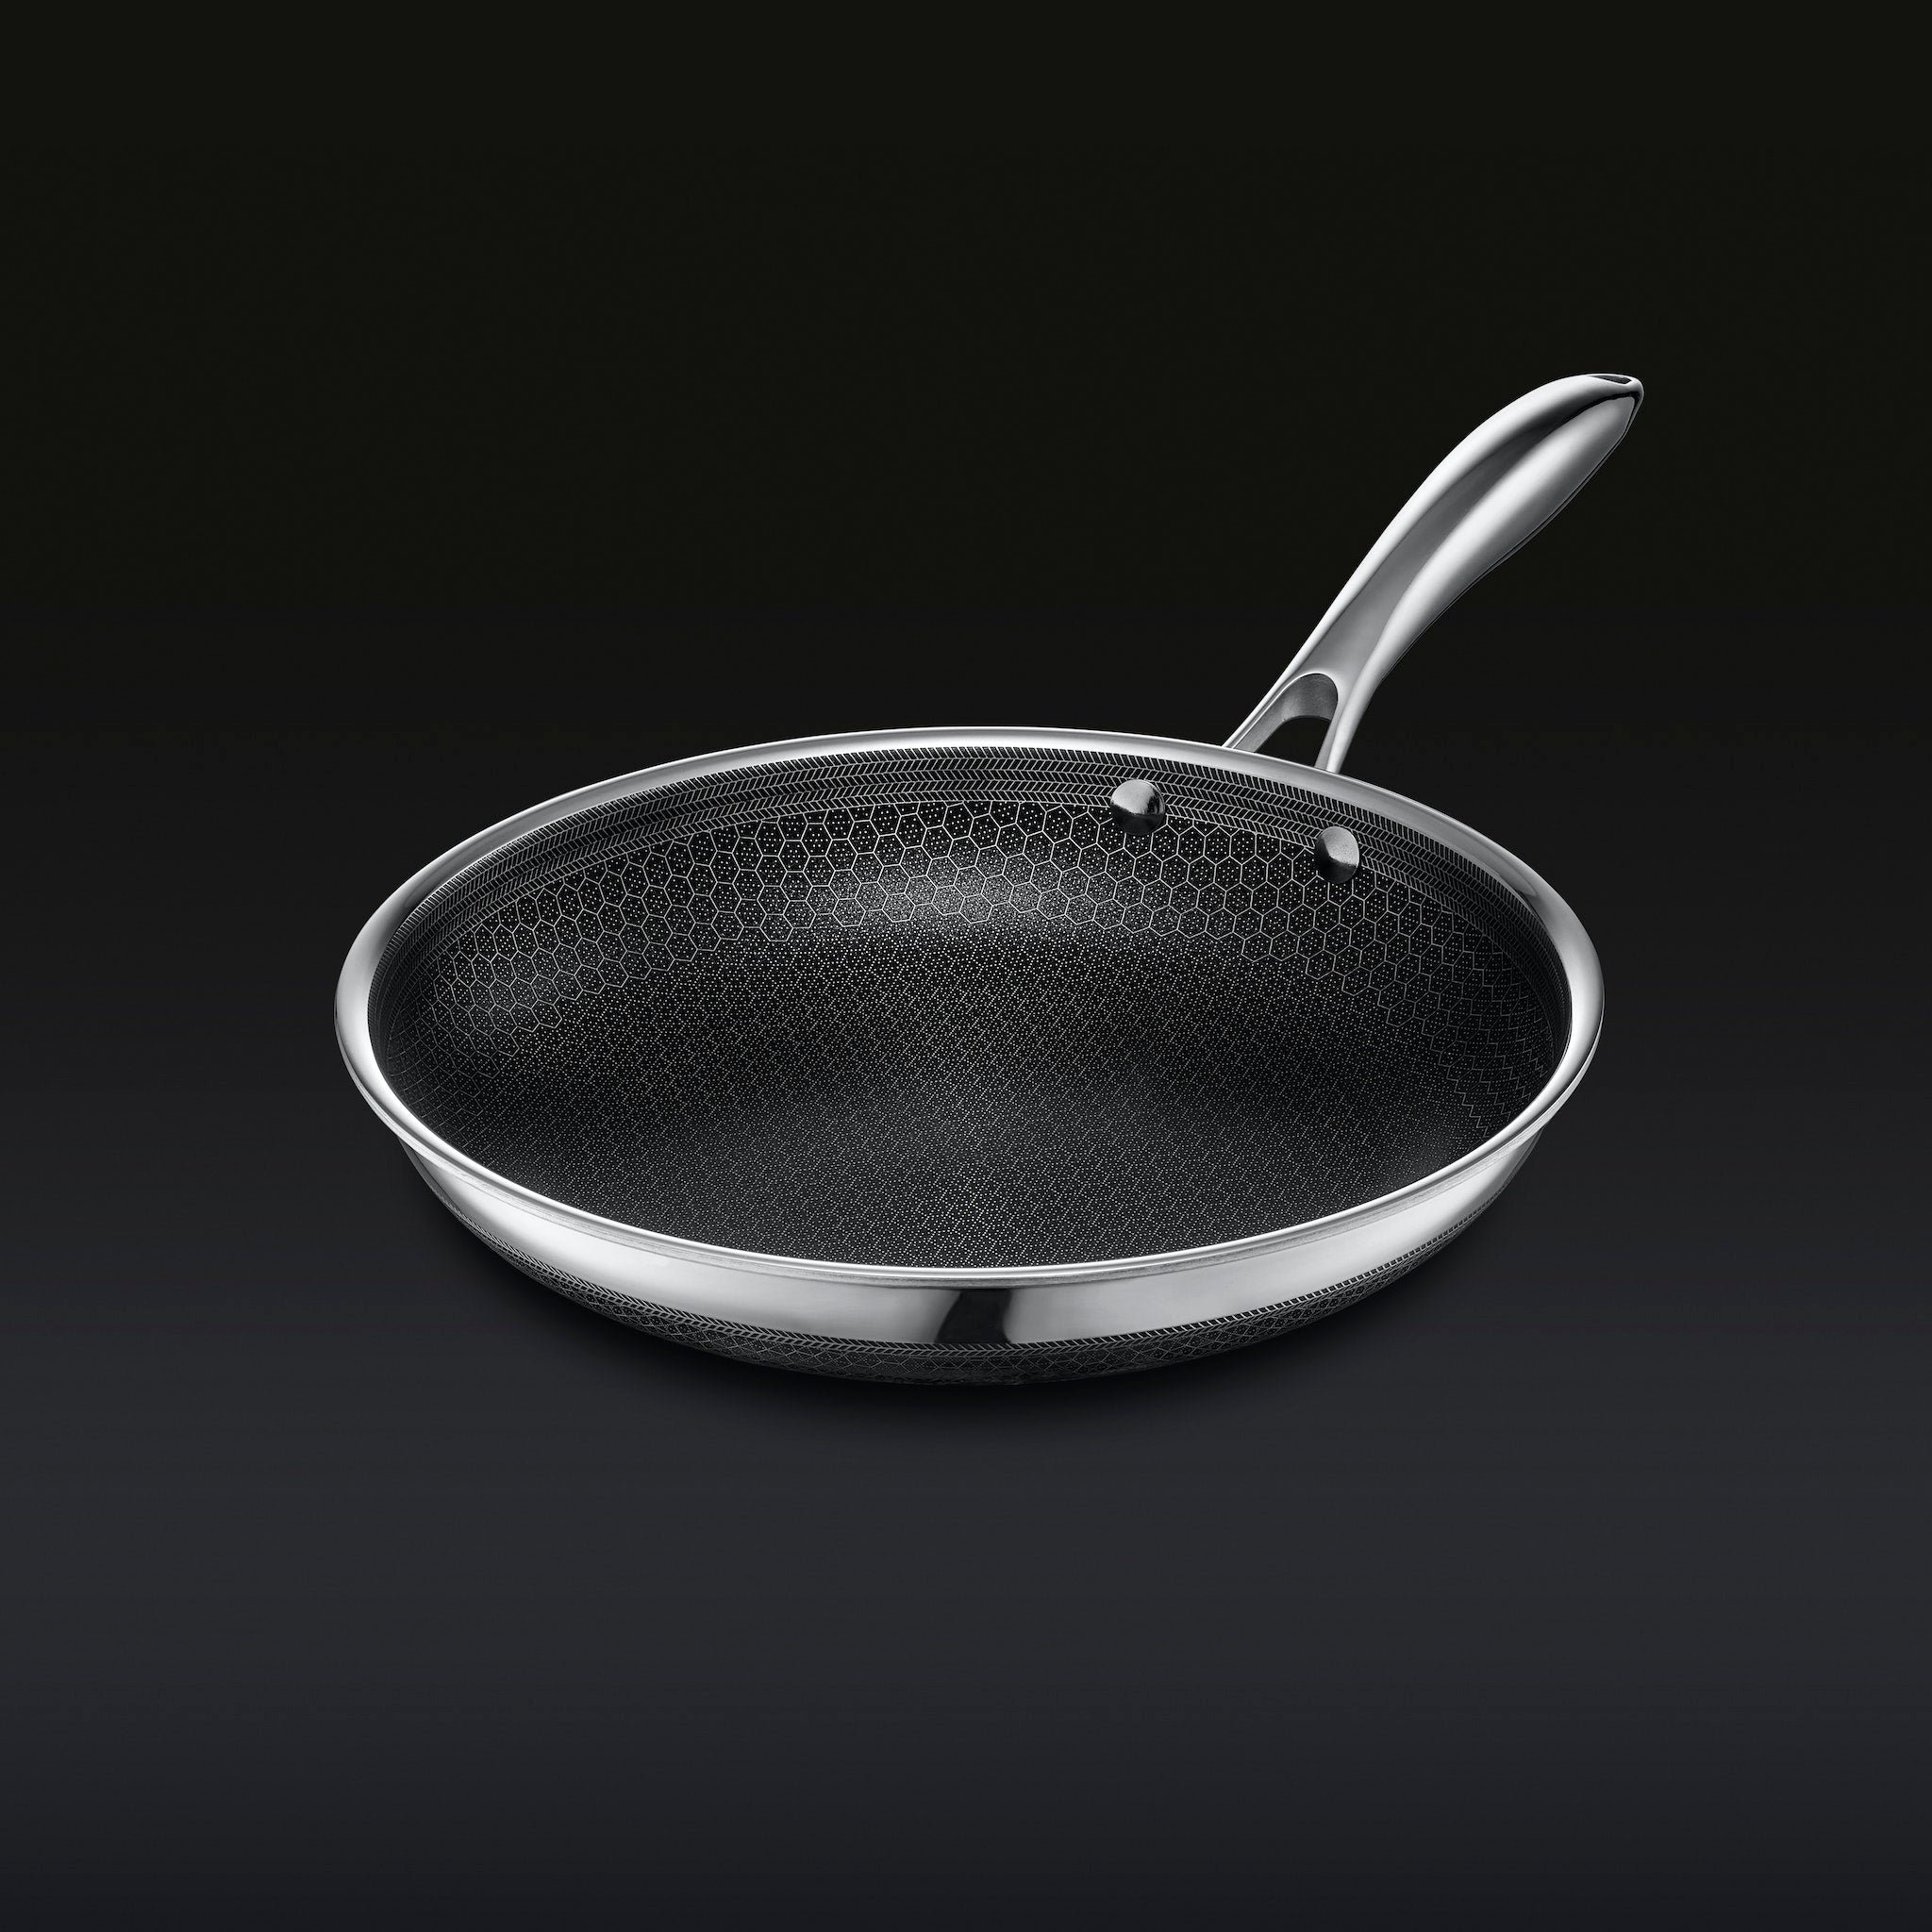 Stainless steel frying pan with a hexagonal pattern on a dark background.